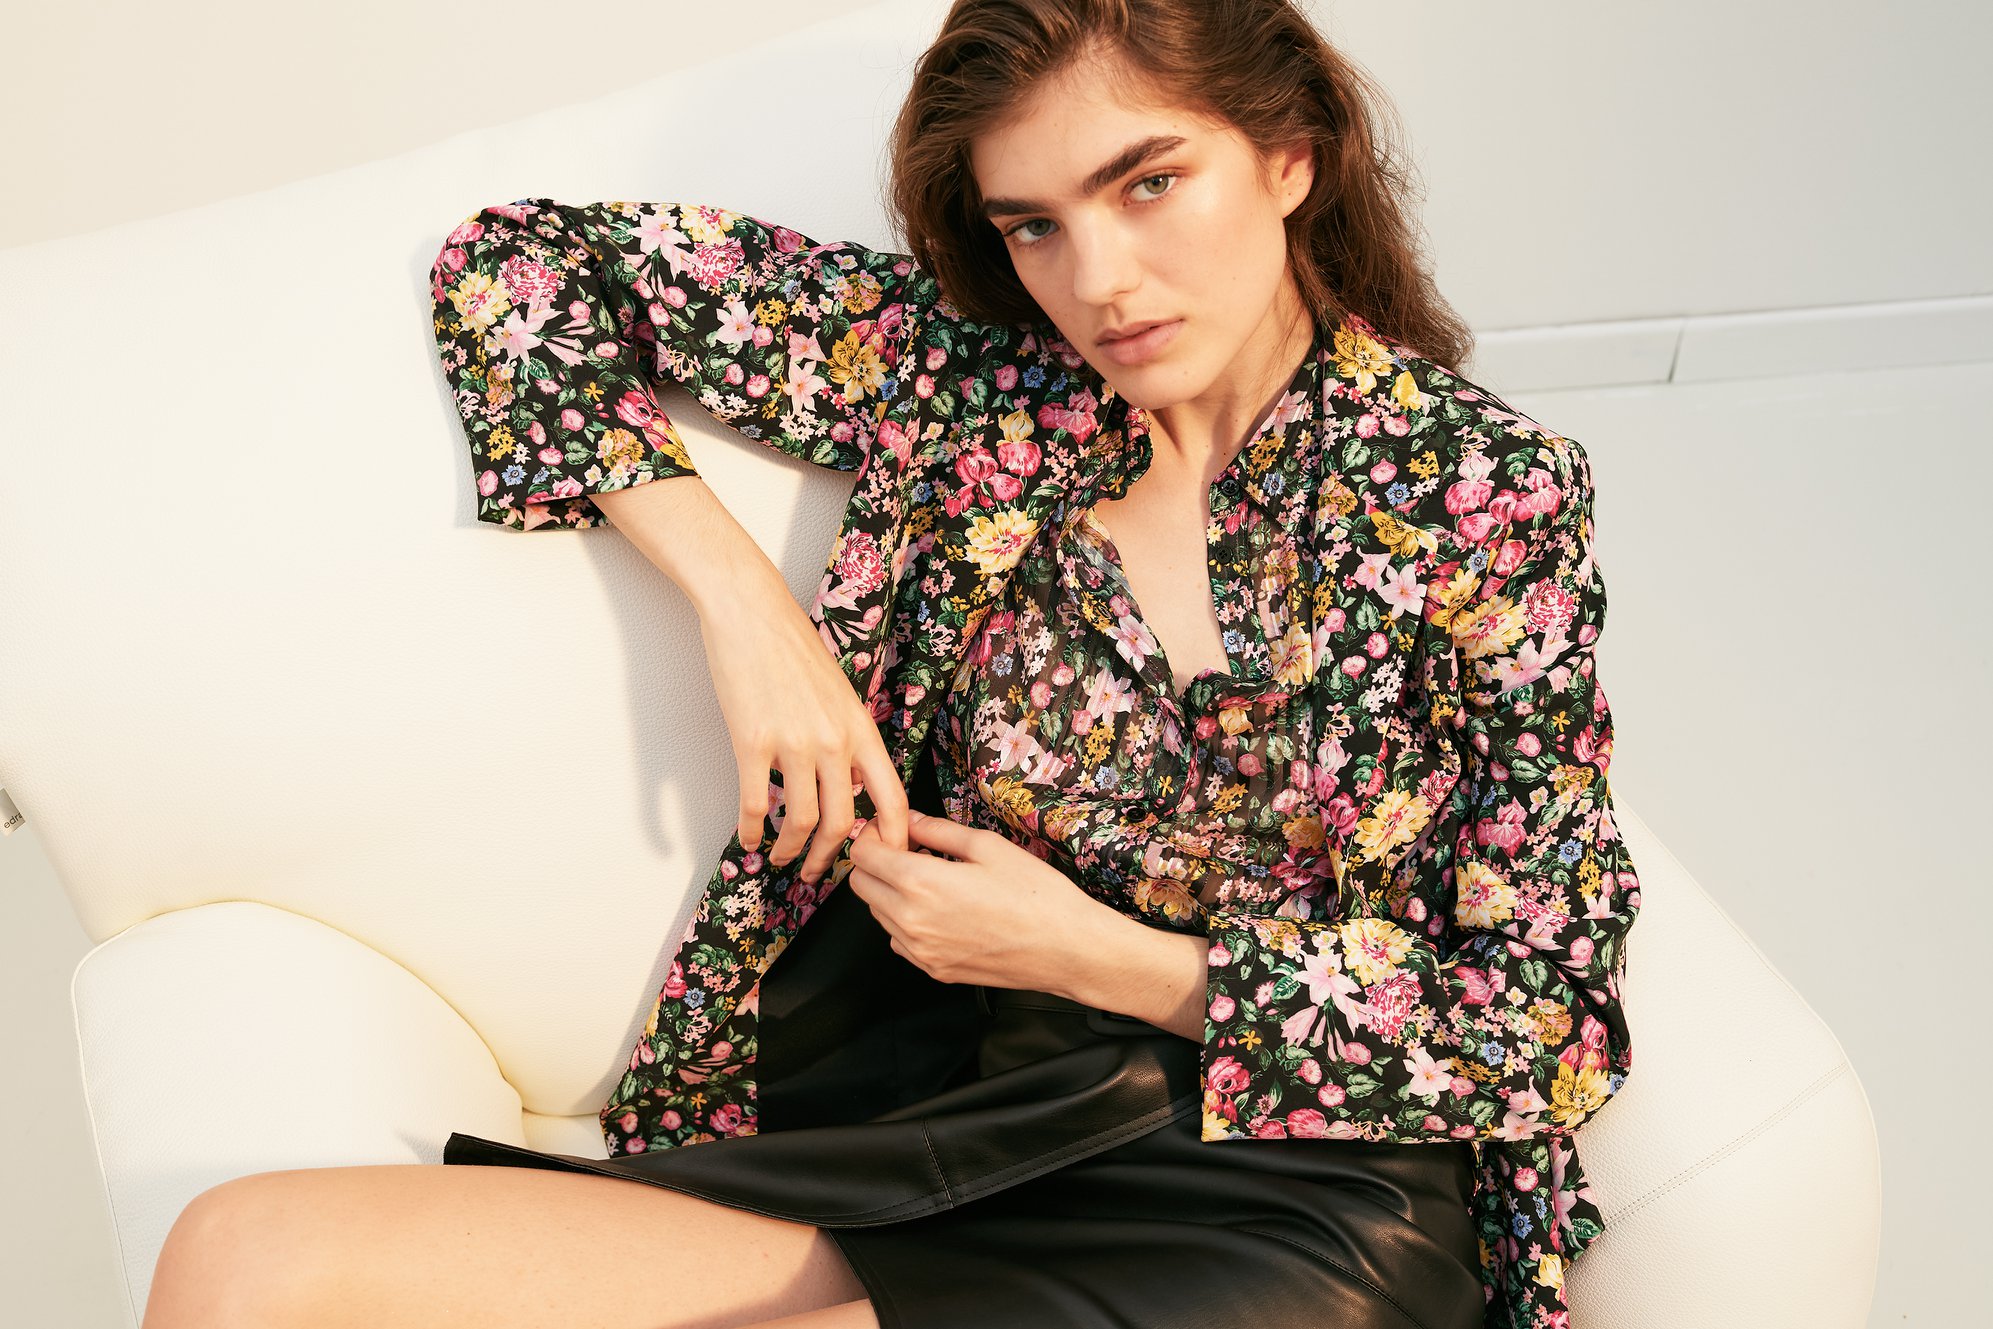 FASHION FLASHBACK / Bougie dressing is à la mode. The trend of the moment is full of 70s references:  lace blouses, floral prints and flared jeans boasting both bohemian and rule-following bourgeois elements. 